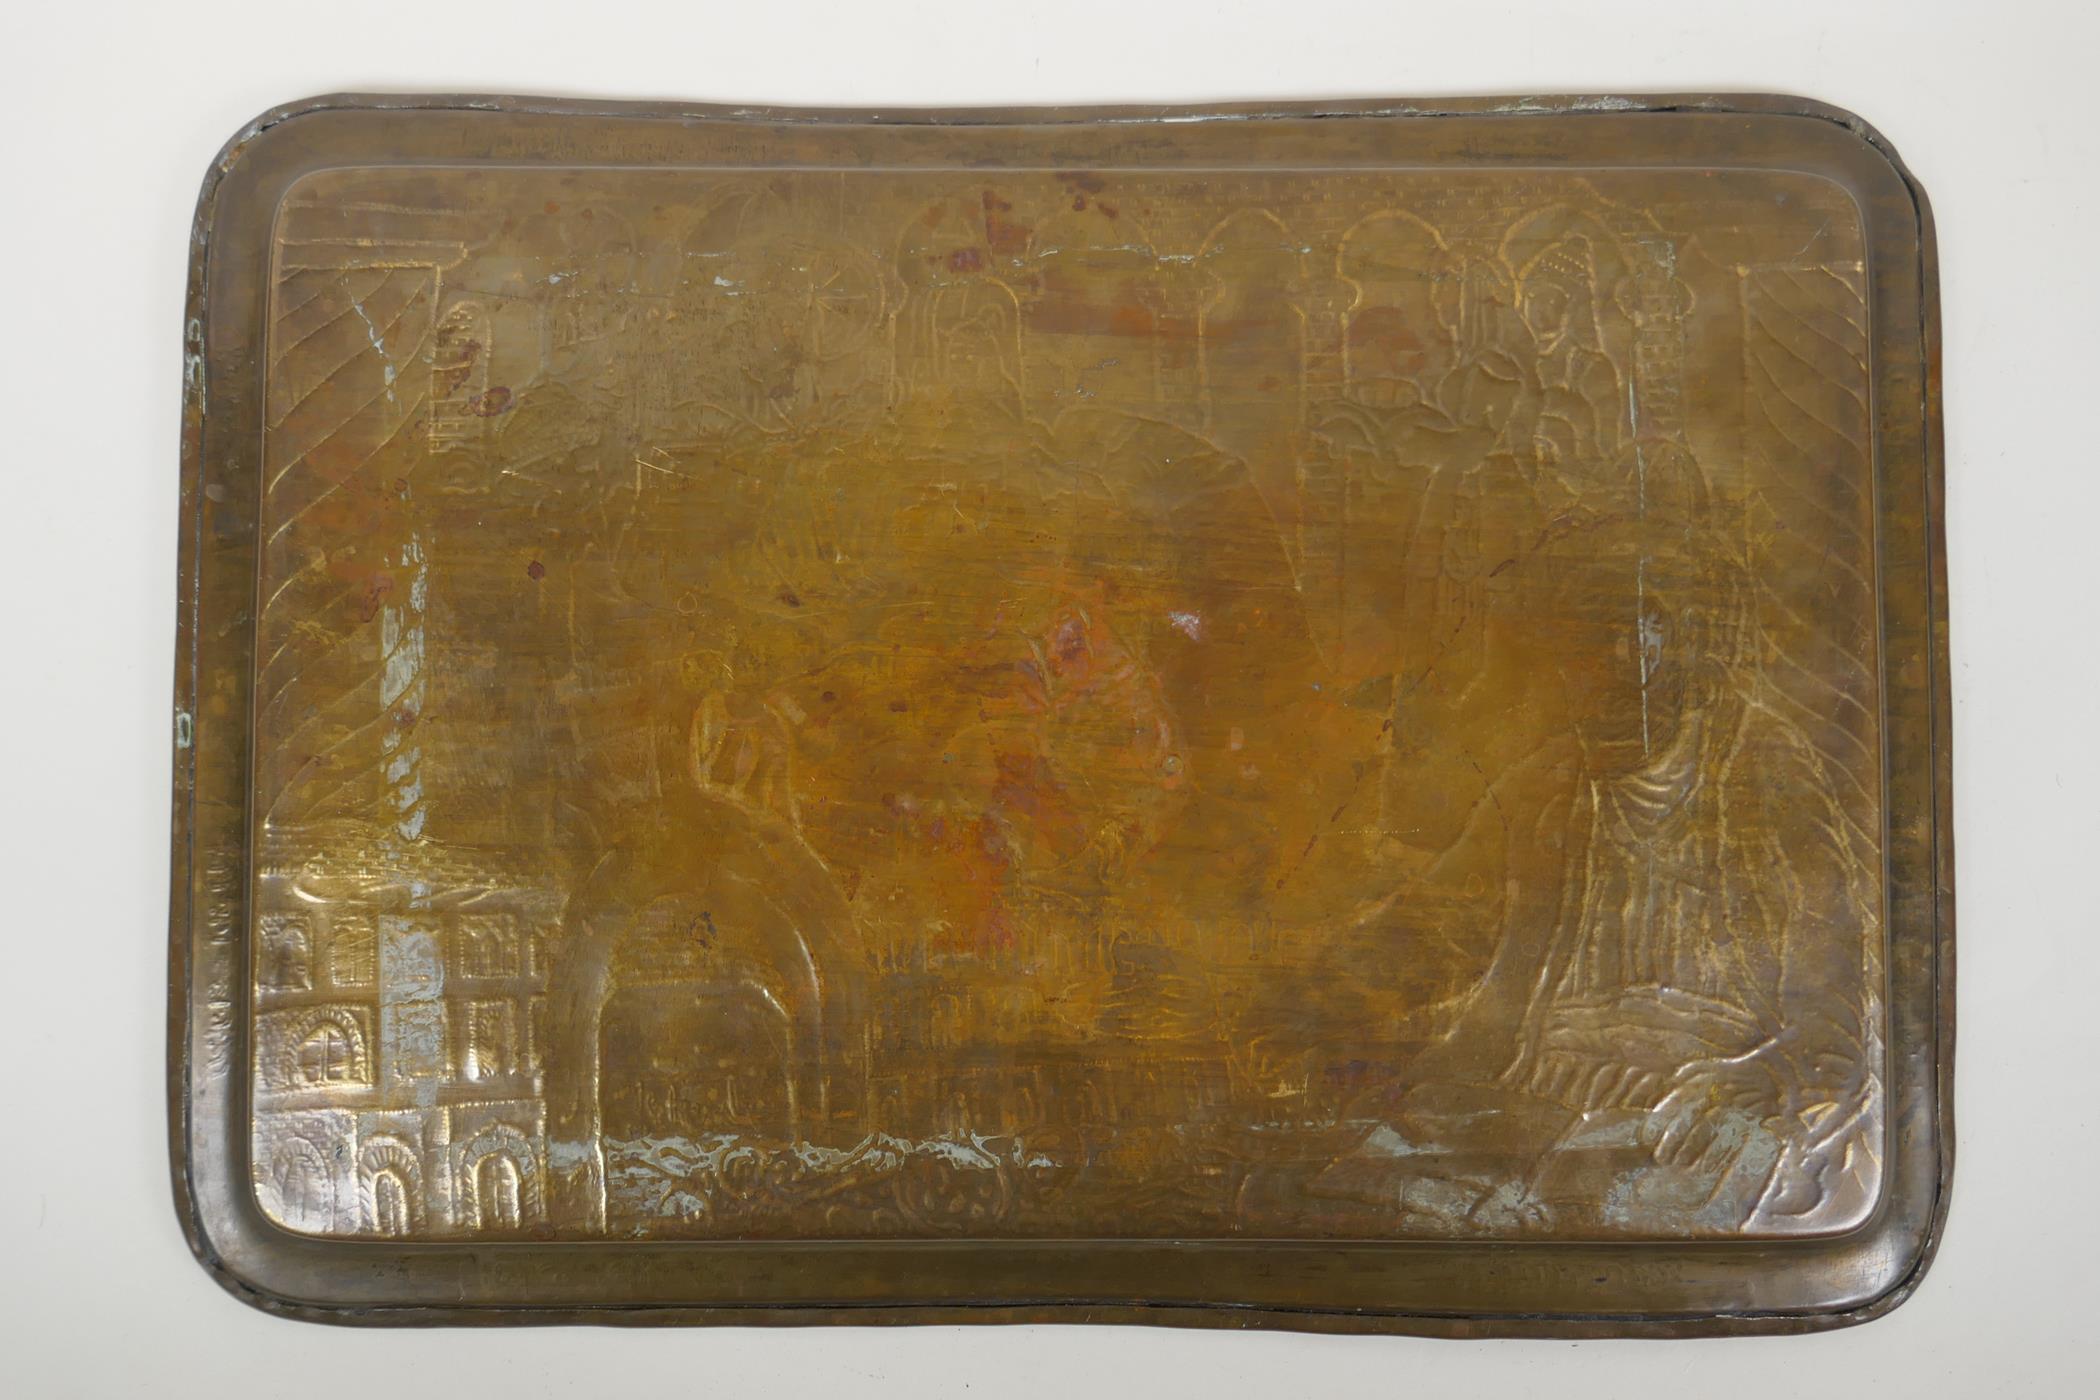 An antique Persian bronze tray with engraved decoration depicting the Kasra Arch and a king - Image 6 of 6